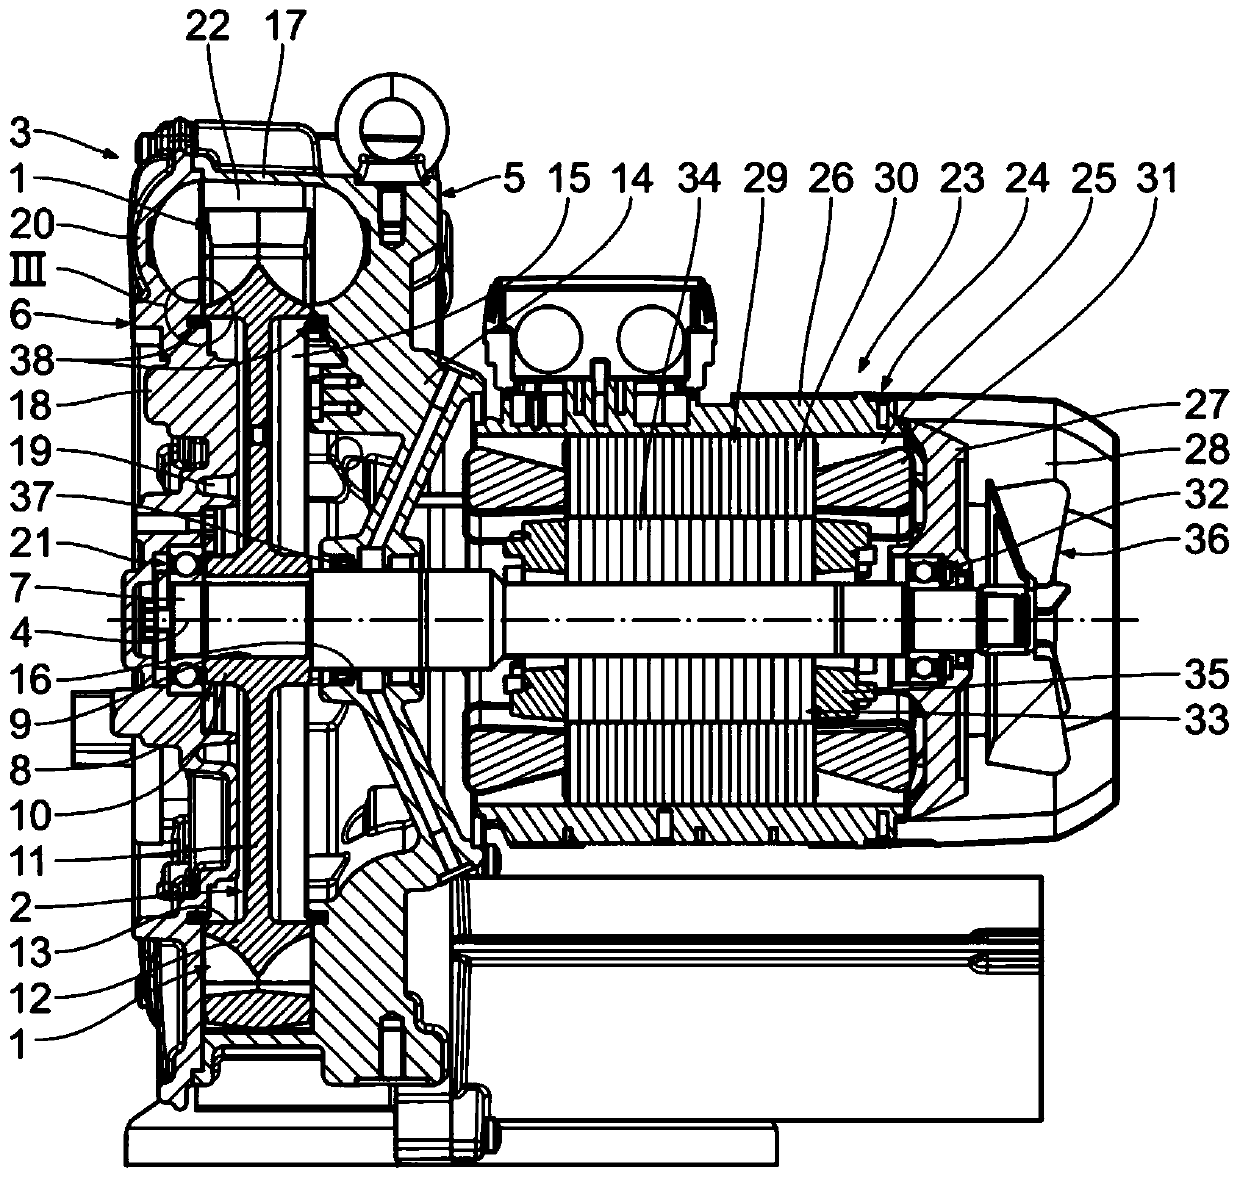 Side channel compressor having a seal assembly